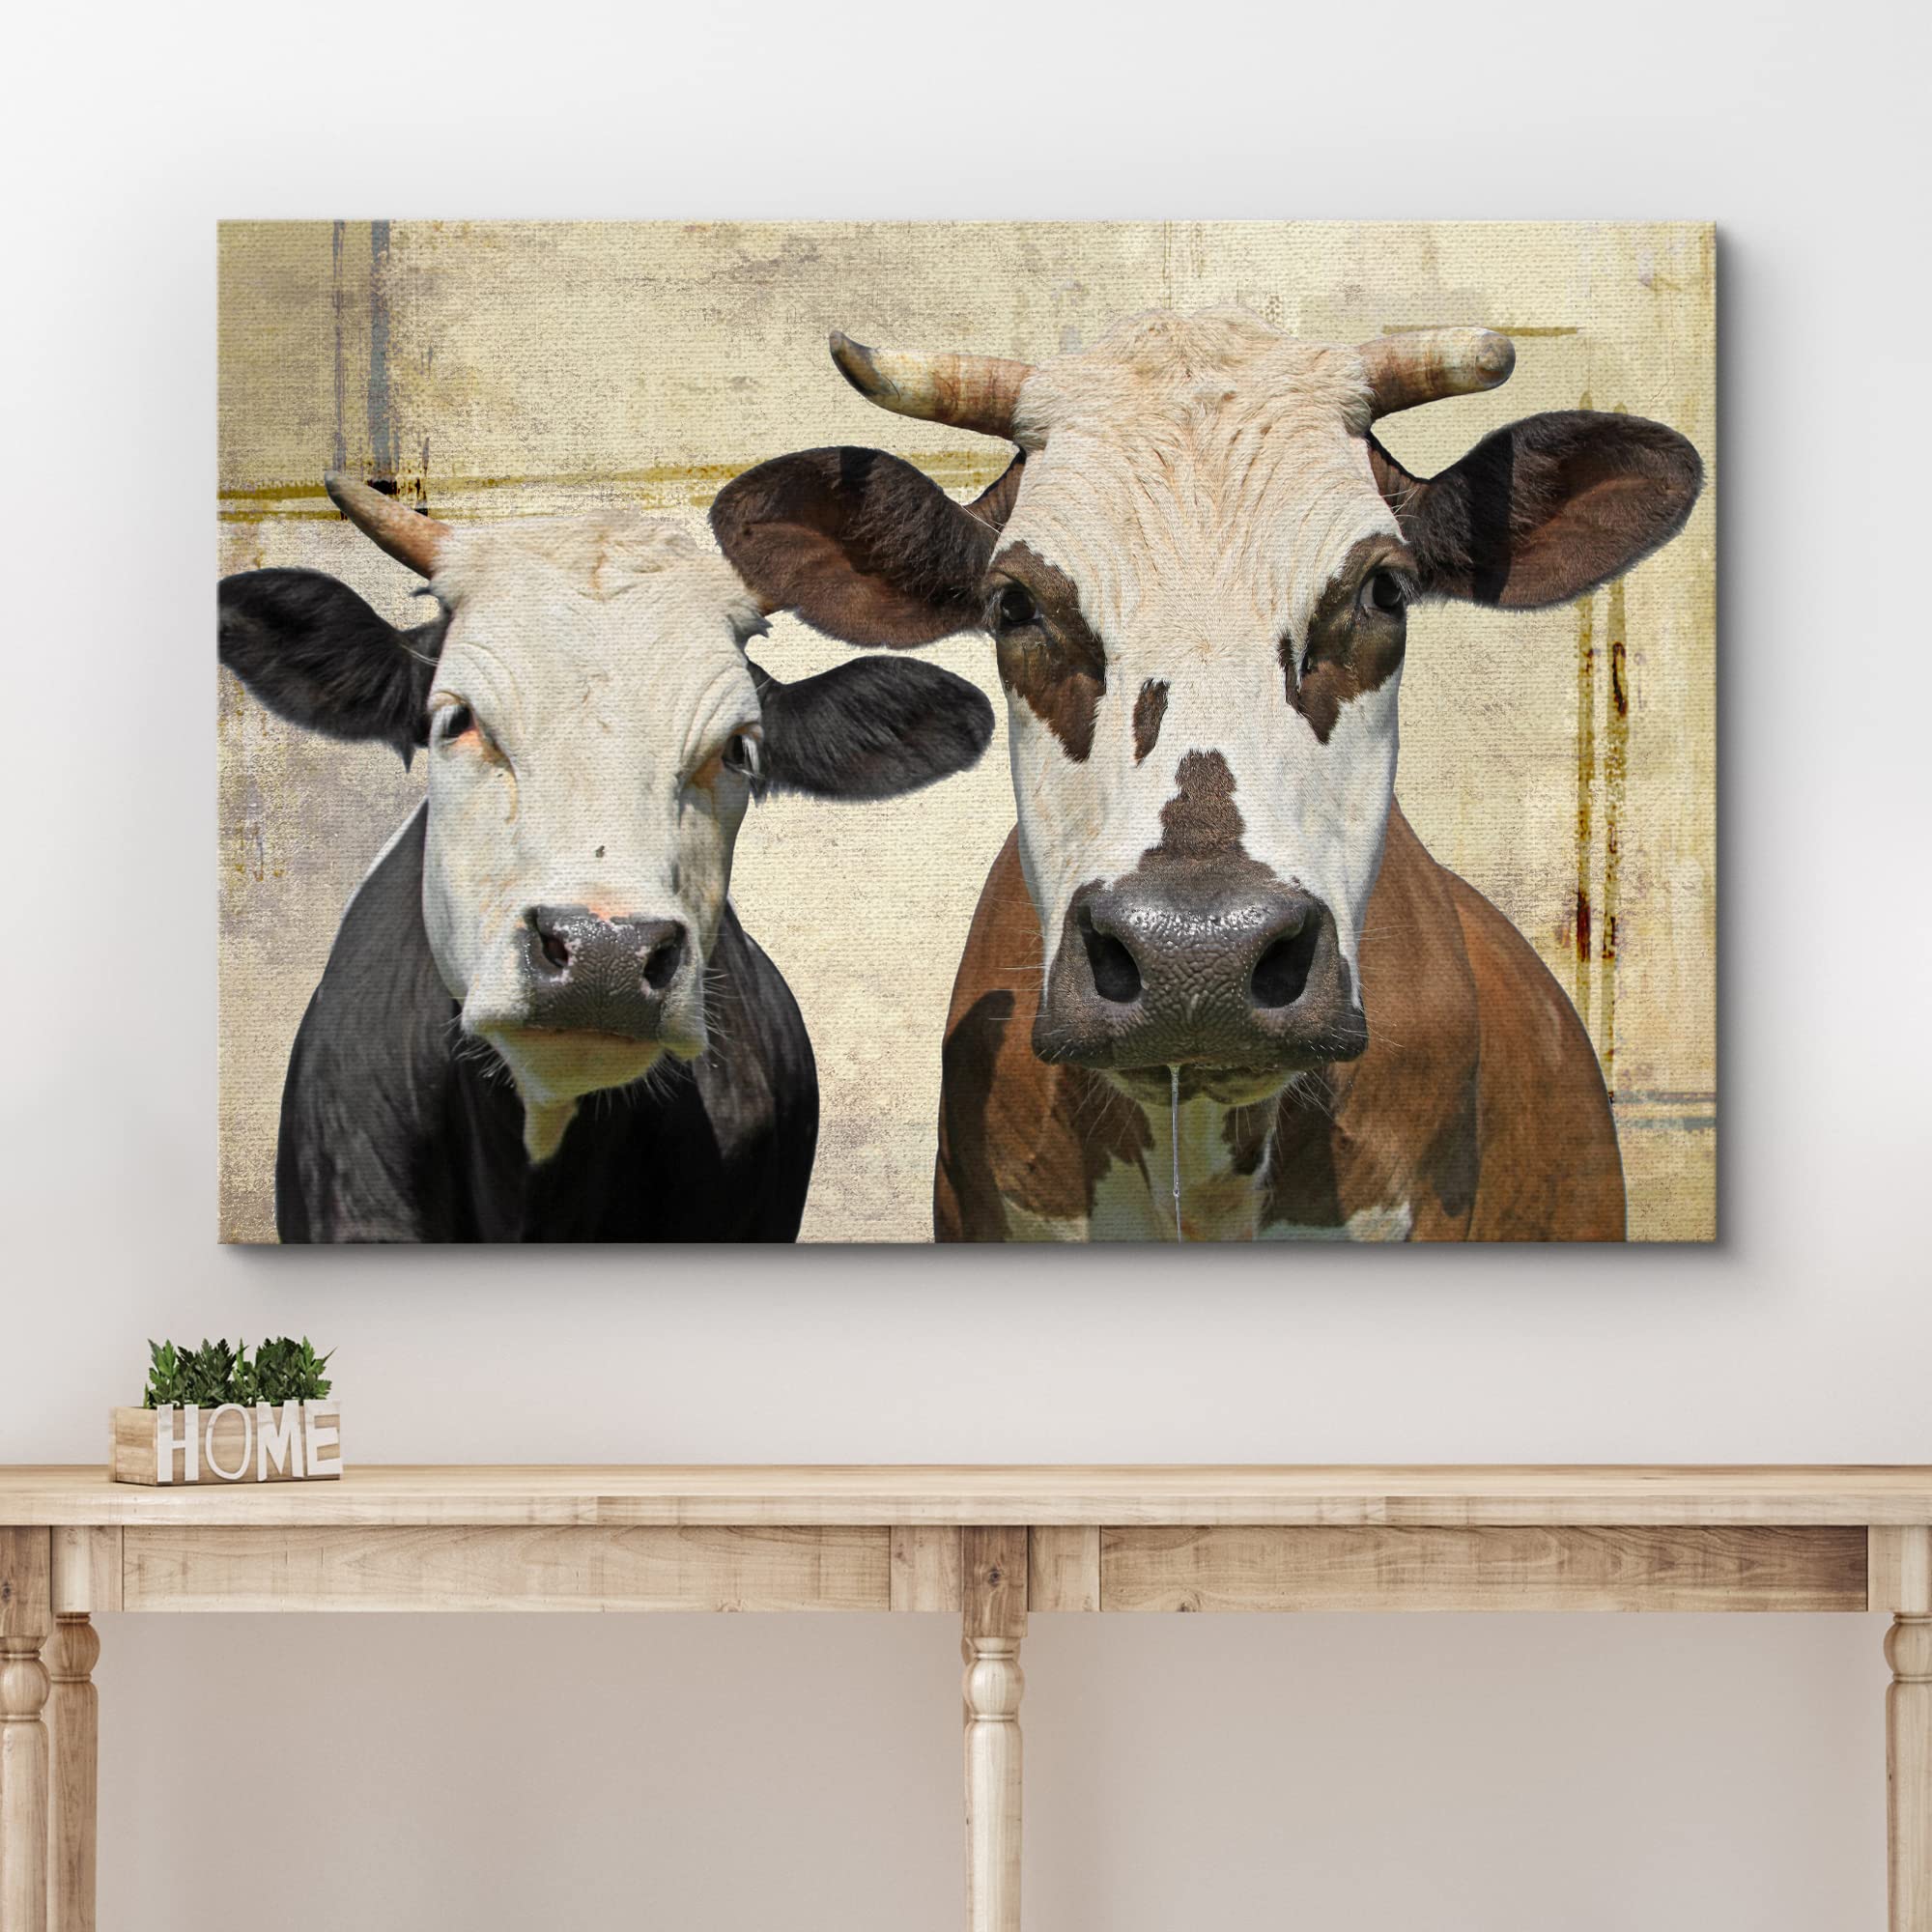 wall26 Canvas Print Wall Art Brown &amp; Black Cow Duo with Grunge Background Animals Wildlife Digital Art Realism Rustic Scenic Nature Photography Colorful for Living Room, Bedroom, Office - 24&quot - image 3 of 5